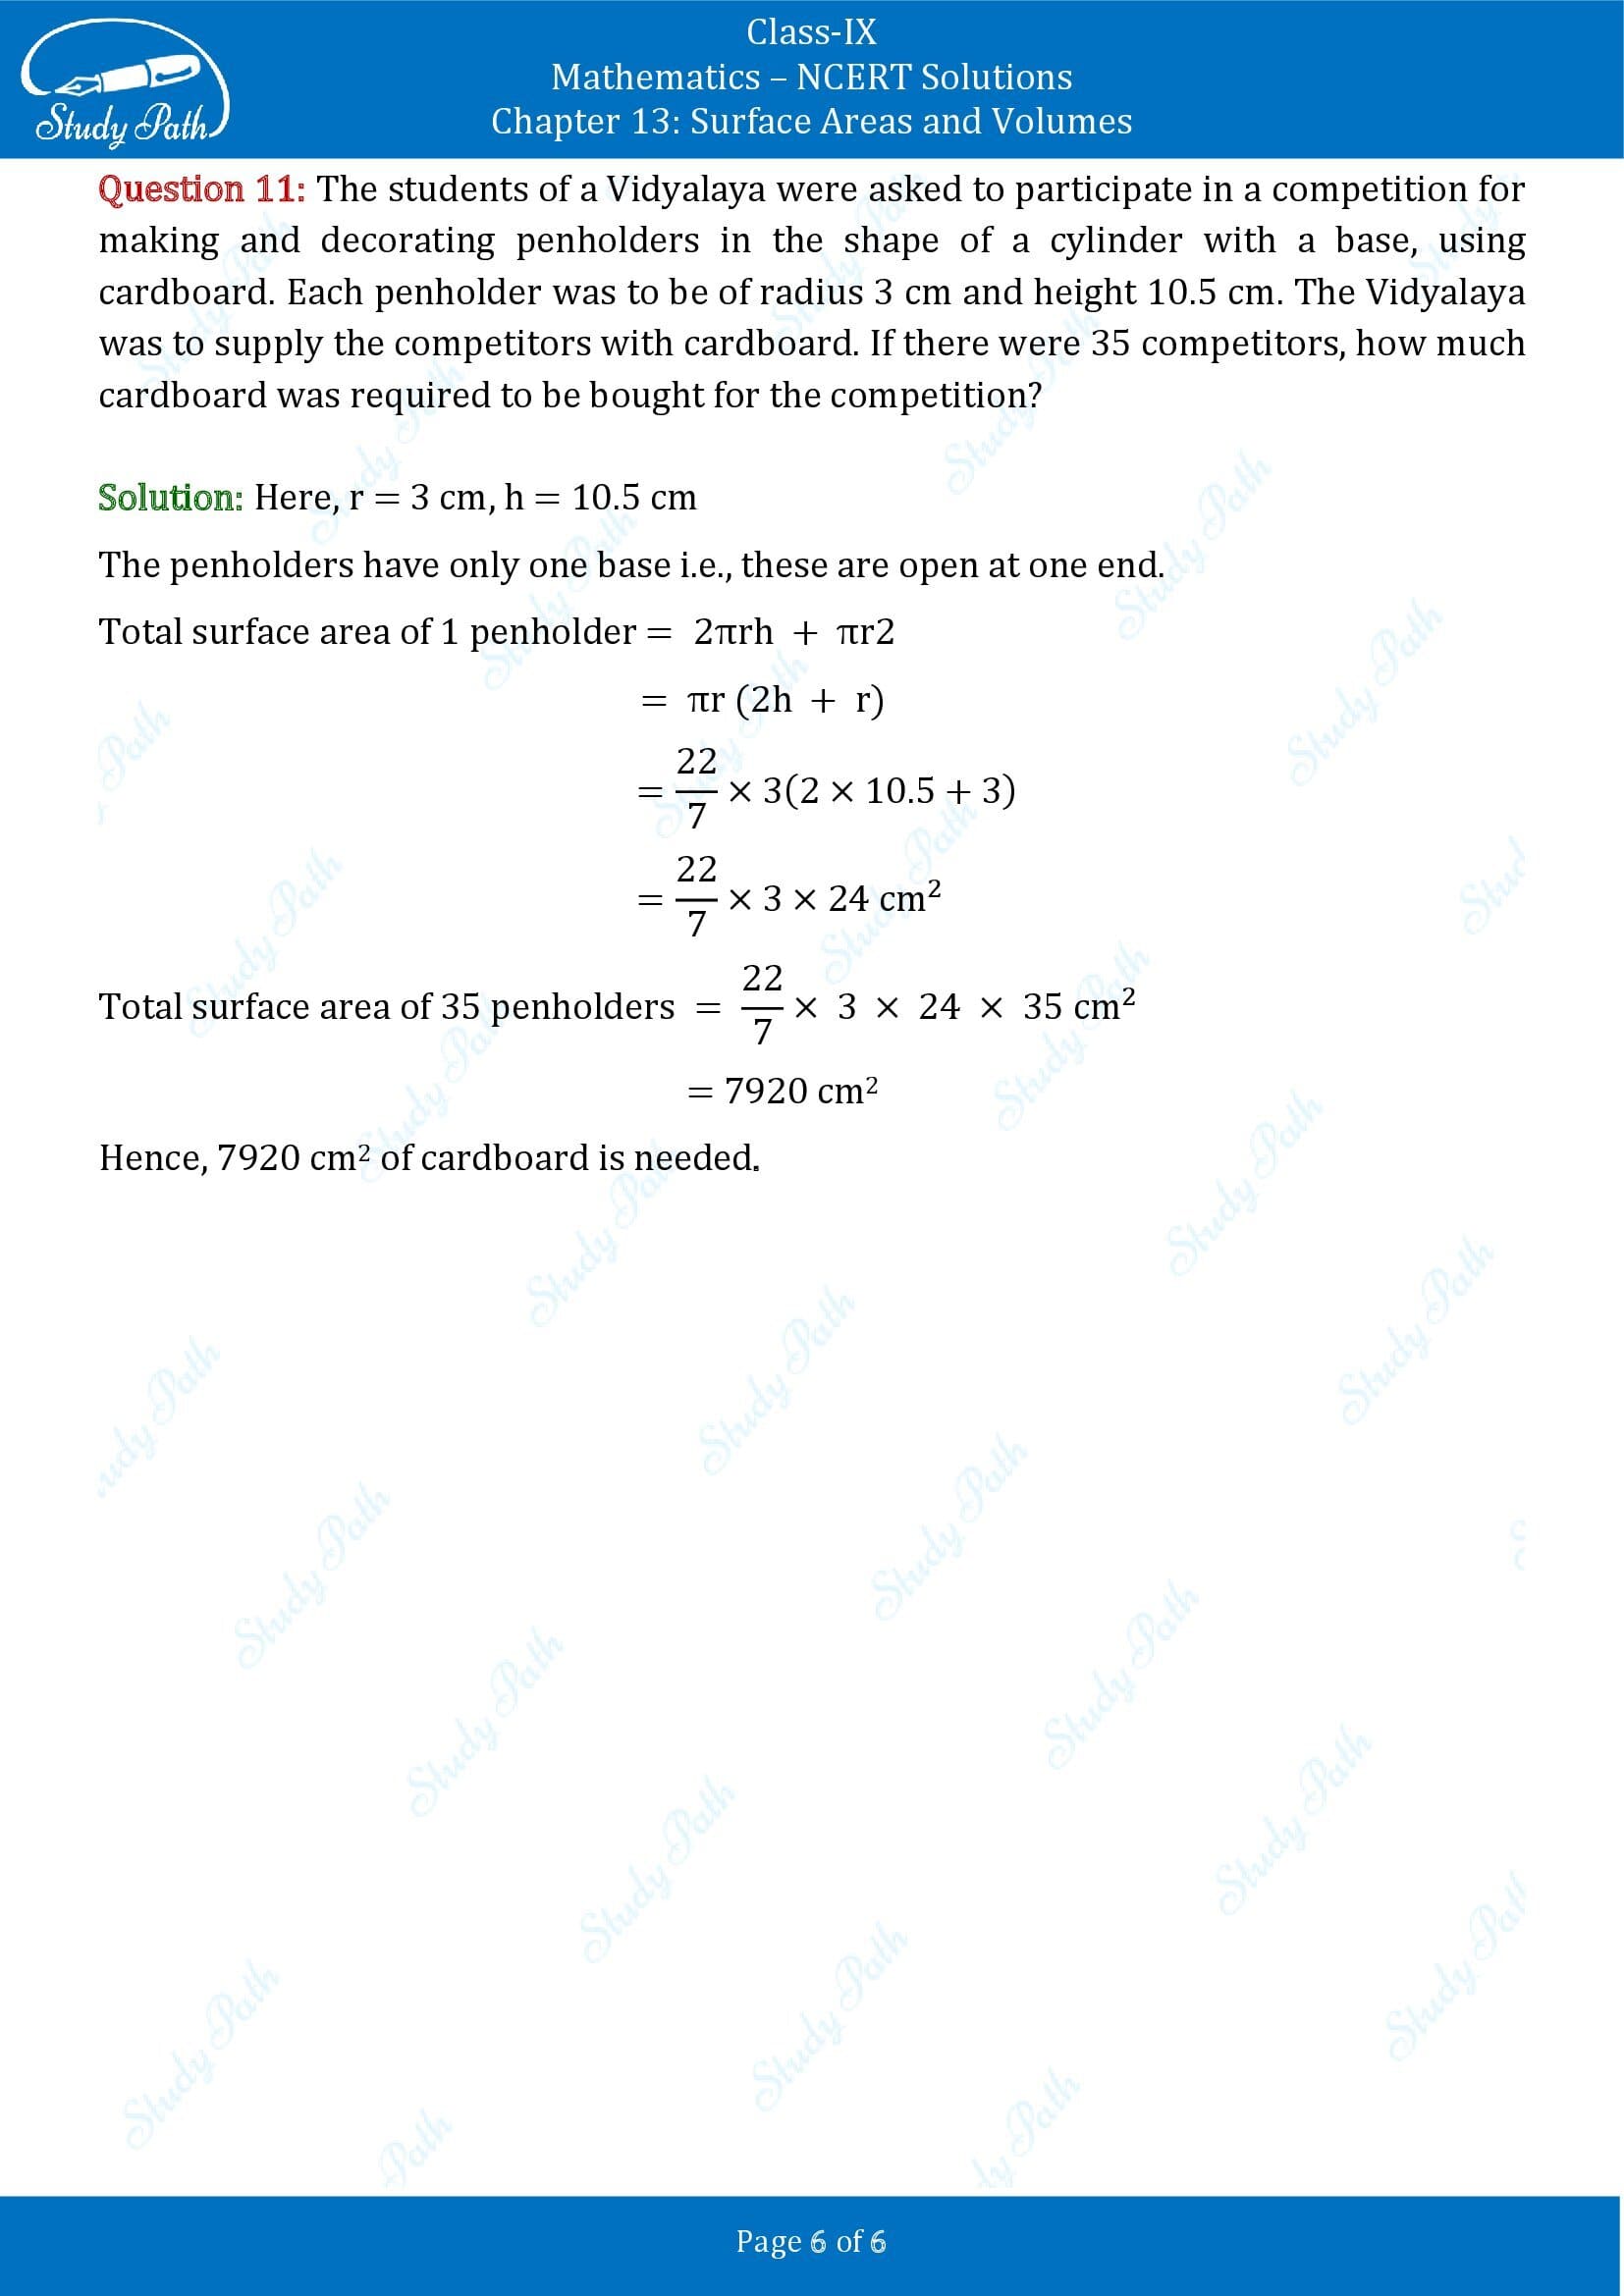 NCERT Solutions for Class 9 Maths Chapter 13 Surface Areas and Volumes Exercise 13.2 00006